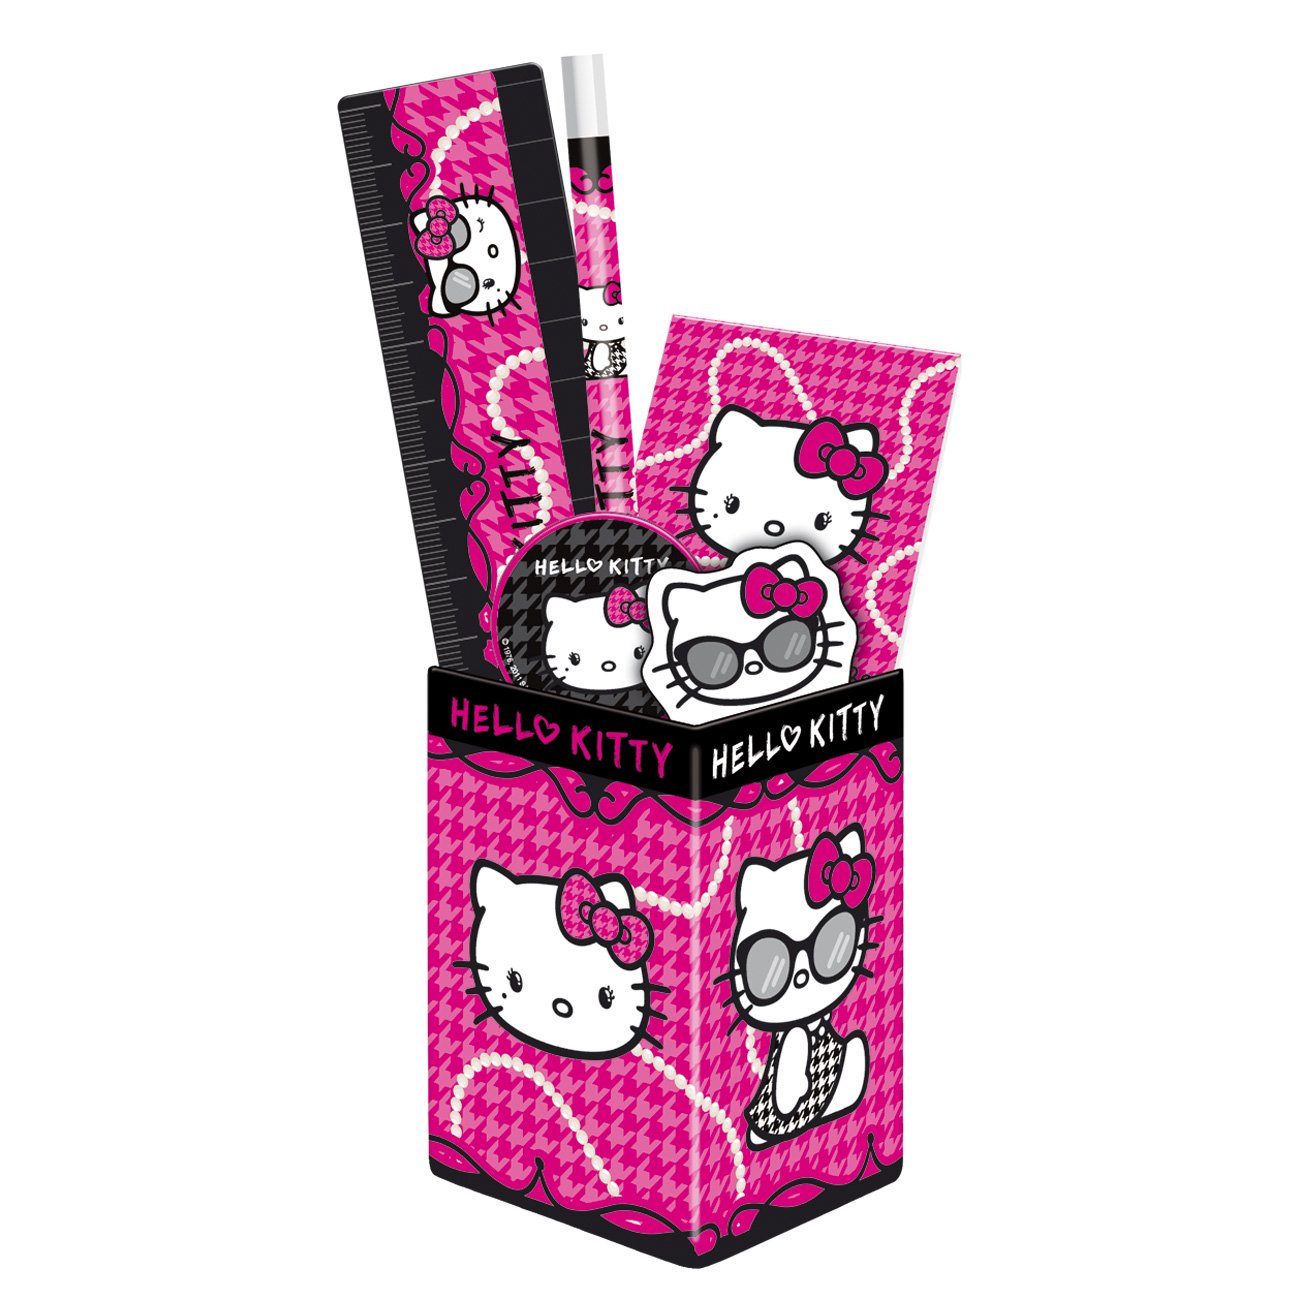 HELLO KITTY POT A CRAYONS FOURNITURES SCOLAIRES